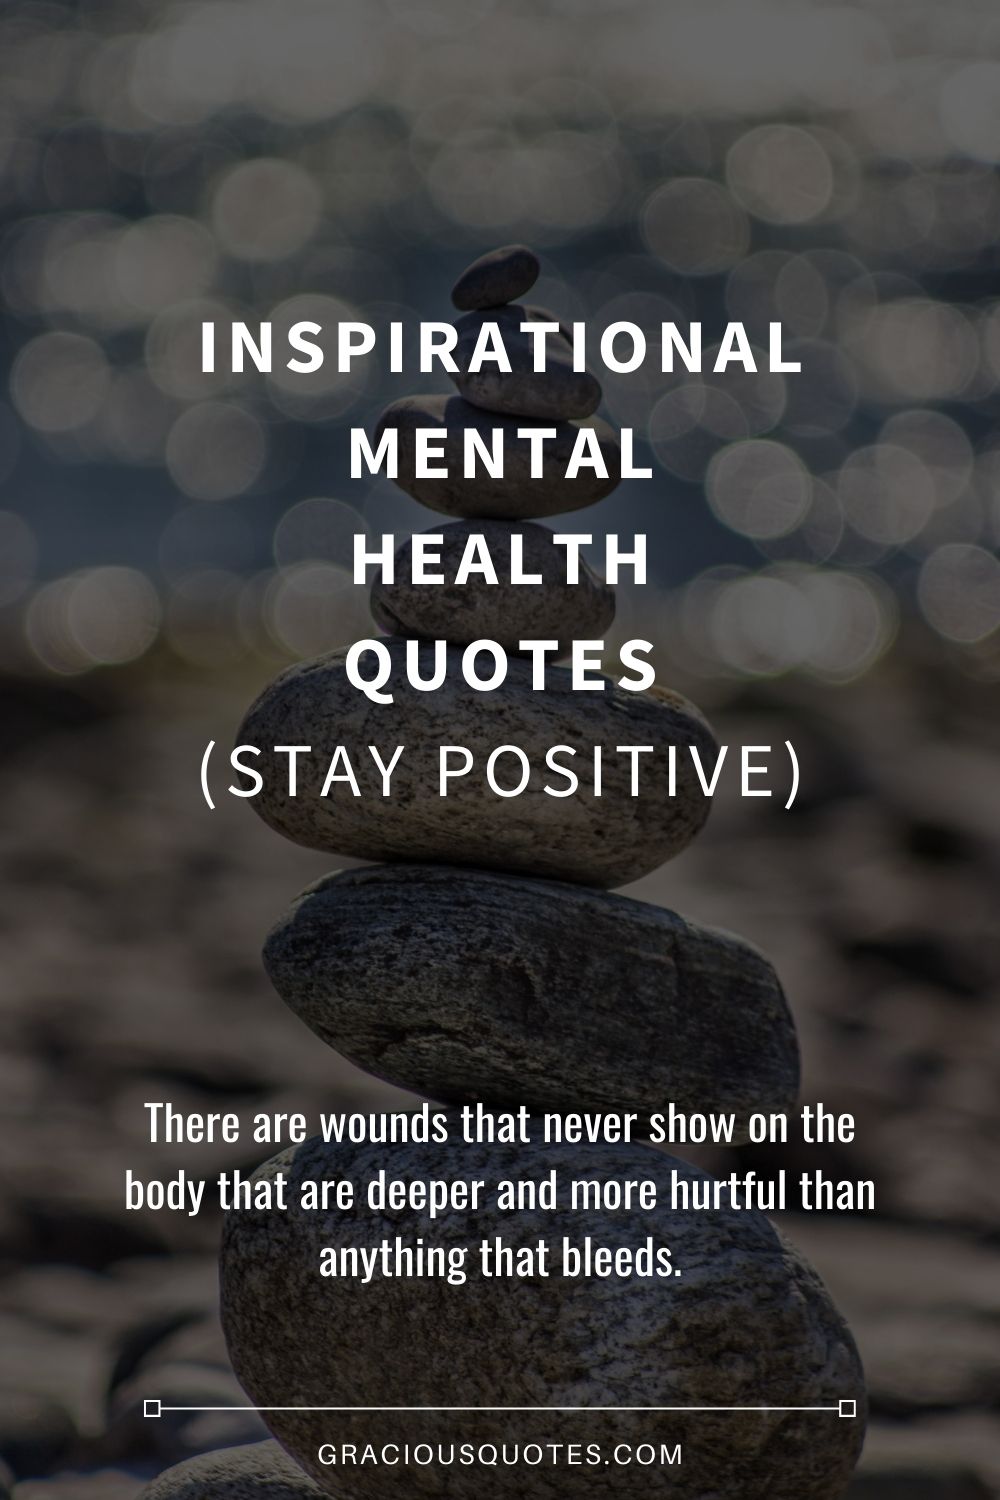 Inspirational Mental Health Quotes (STAY POSITIVE) - Gracious Quotes